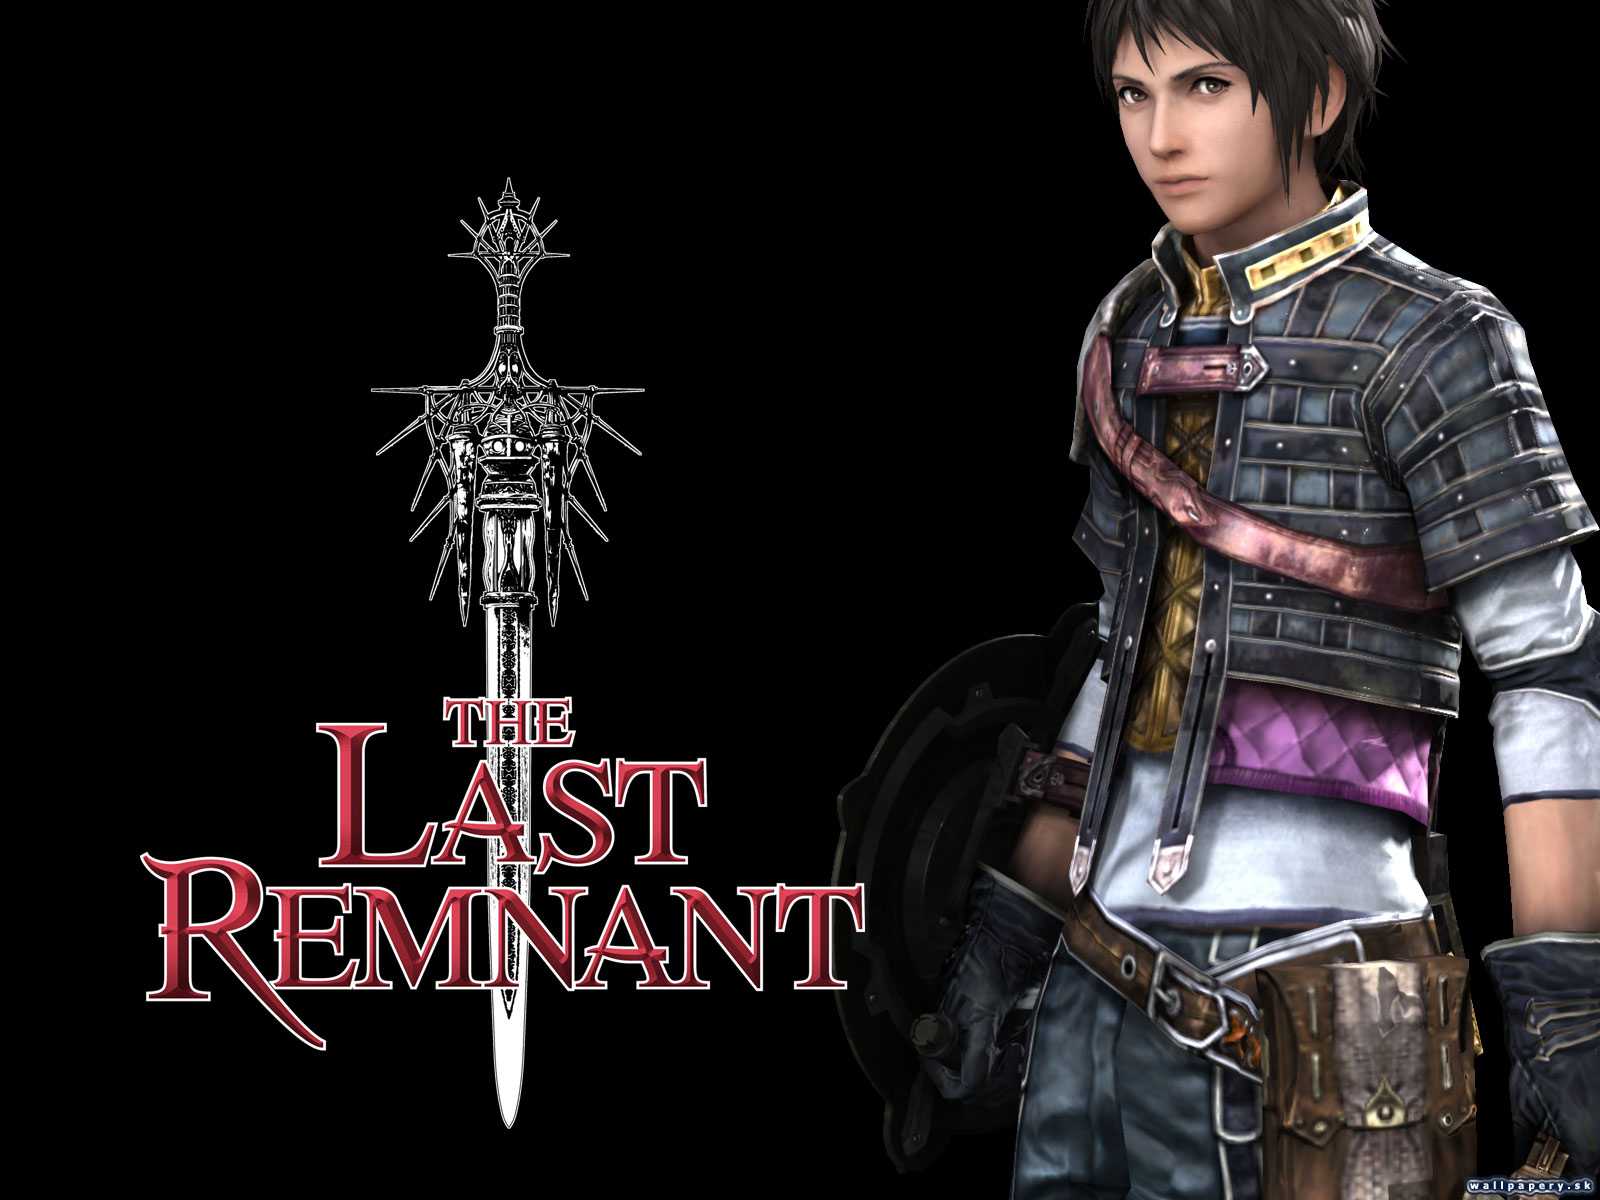 Last remnant remastered steam фото 92